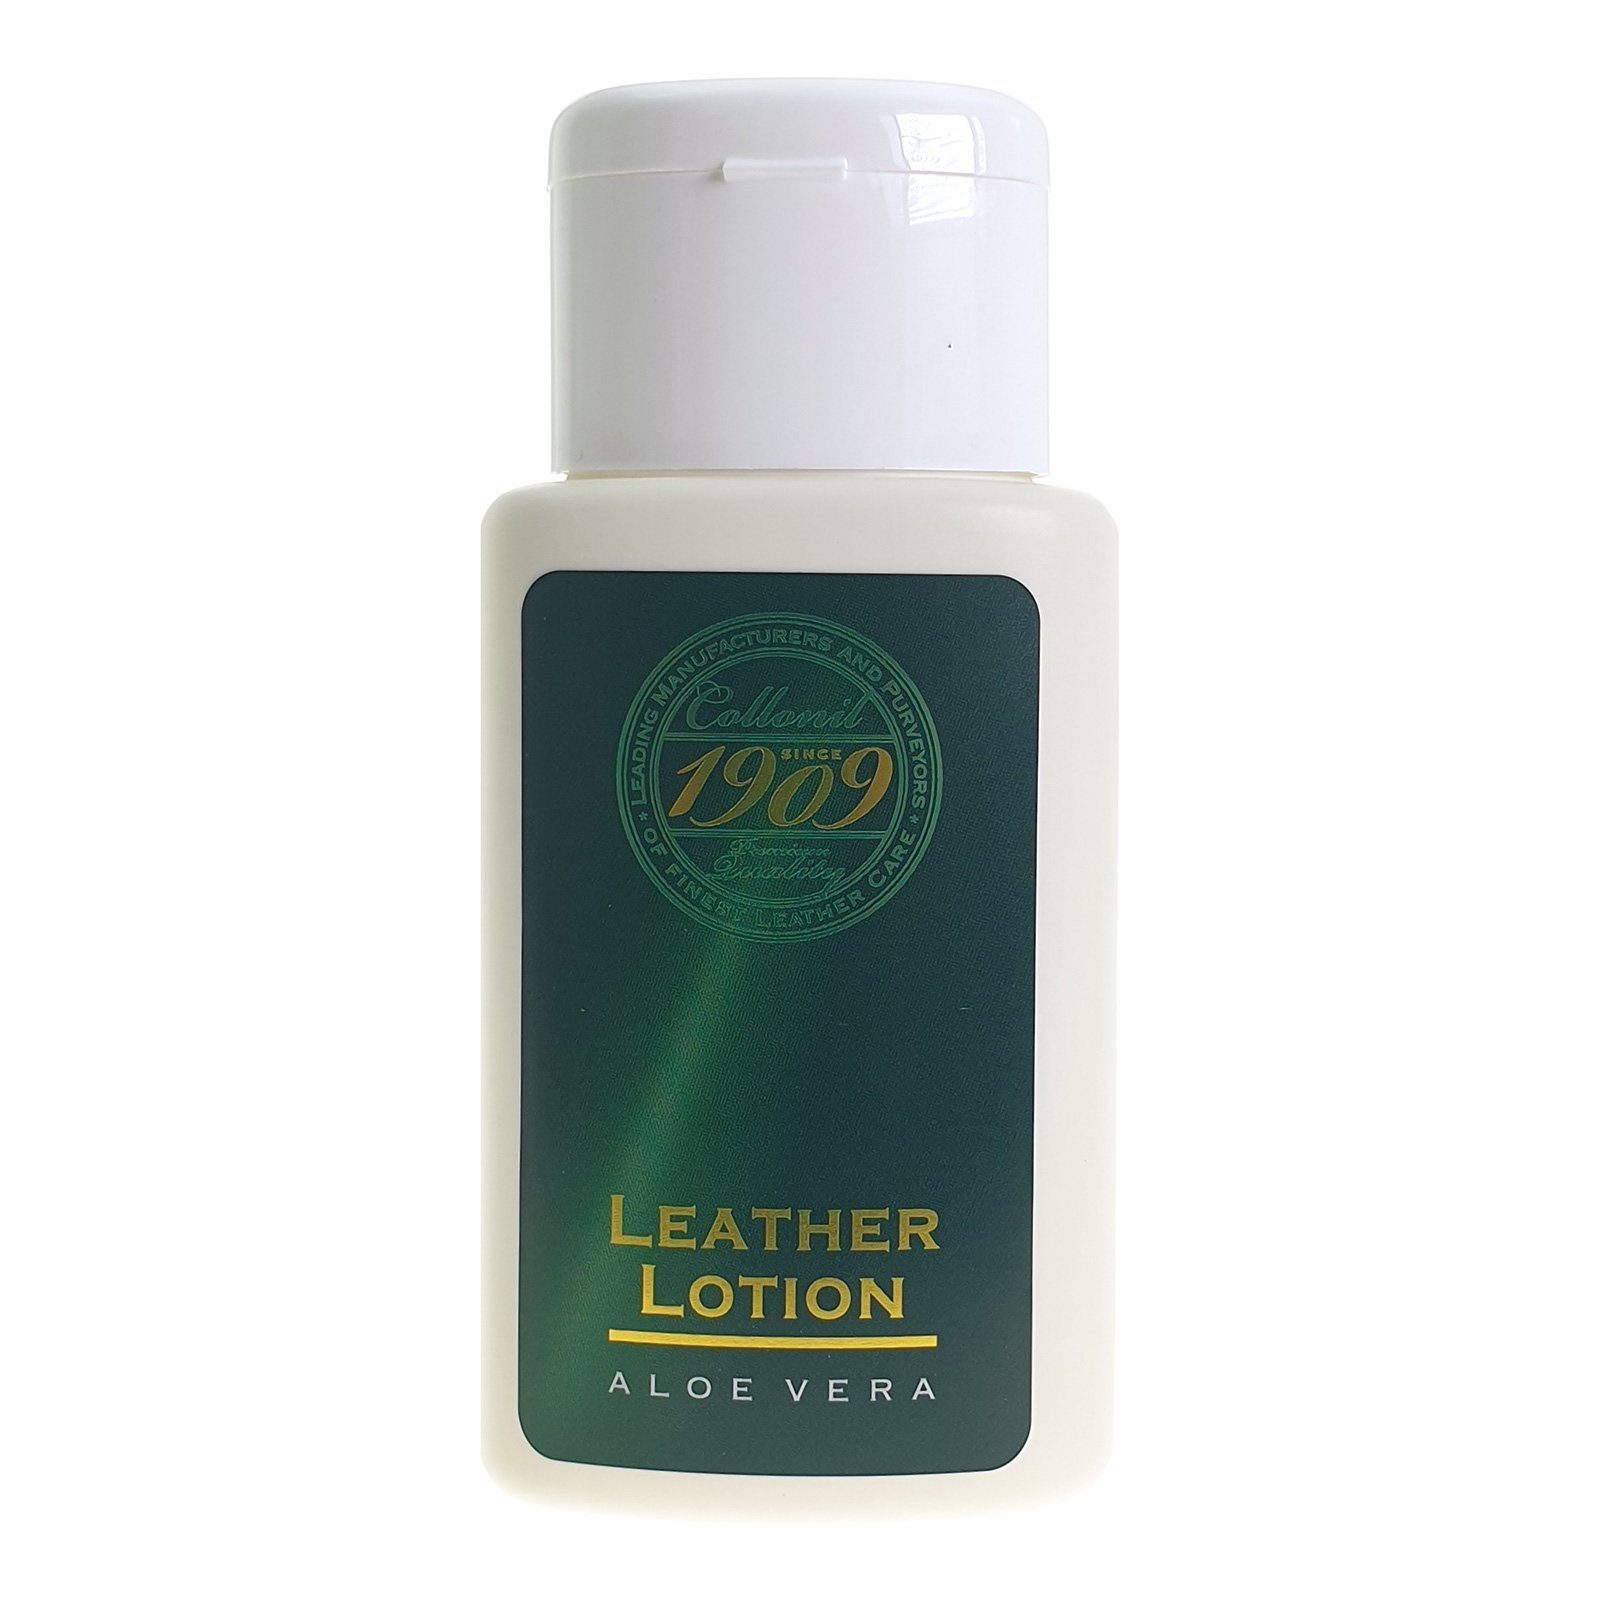 neue Verpackung! Schuhcreme Lotion Leather - 1909 Collonil Collonil 100ml